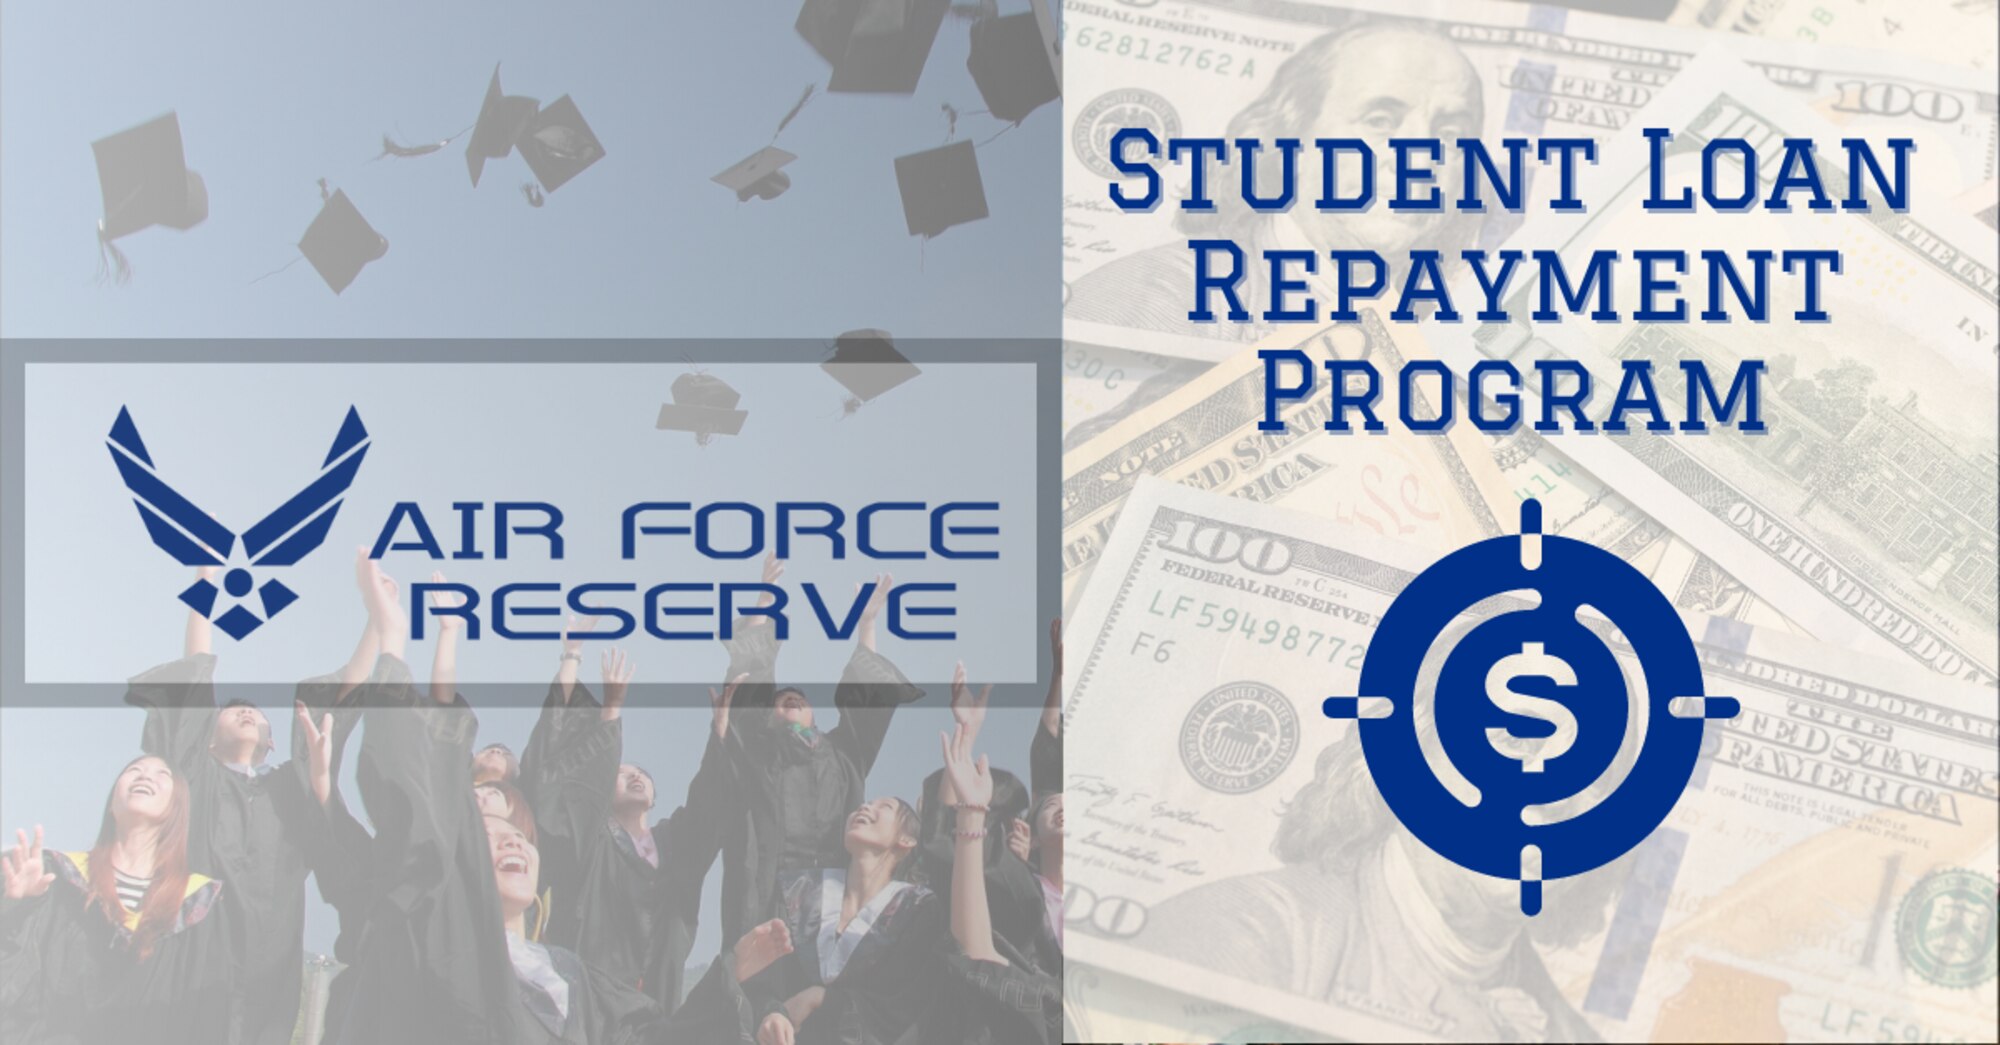 Graphic illustration for the Air Force Reserve student loan repayment program